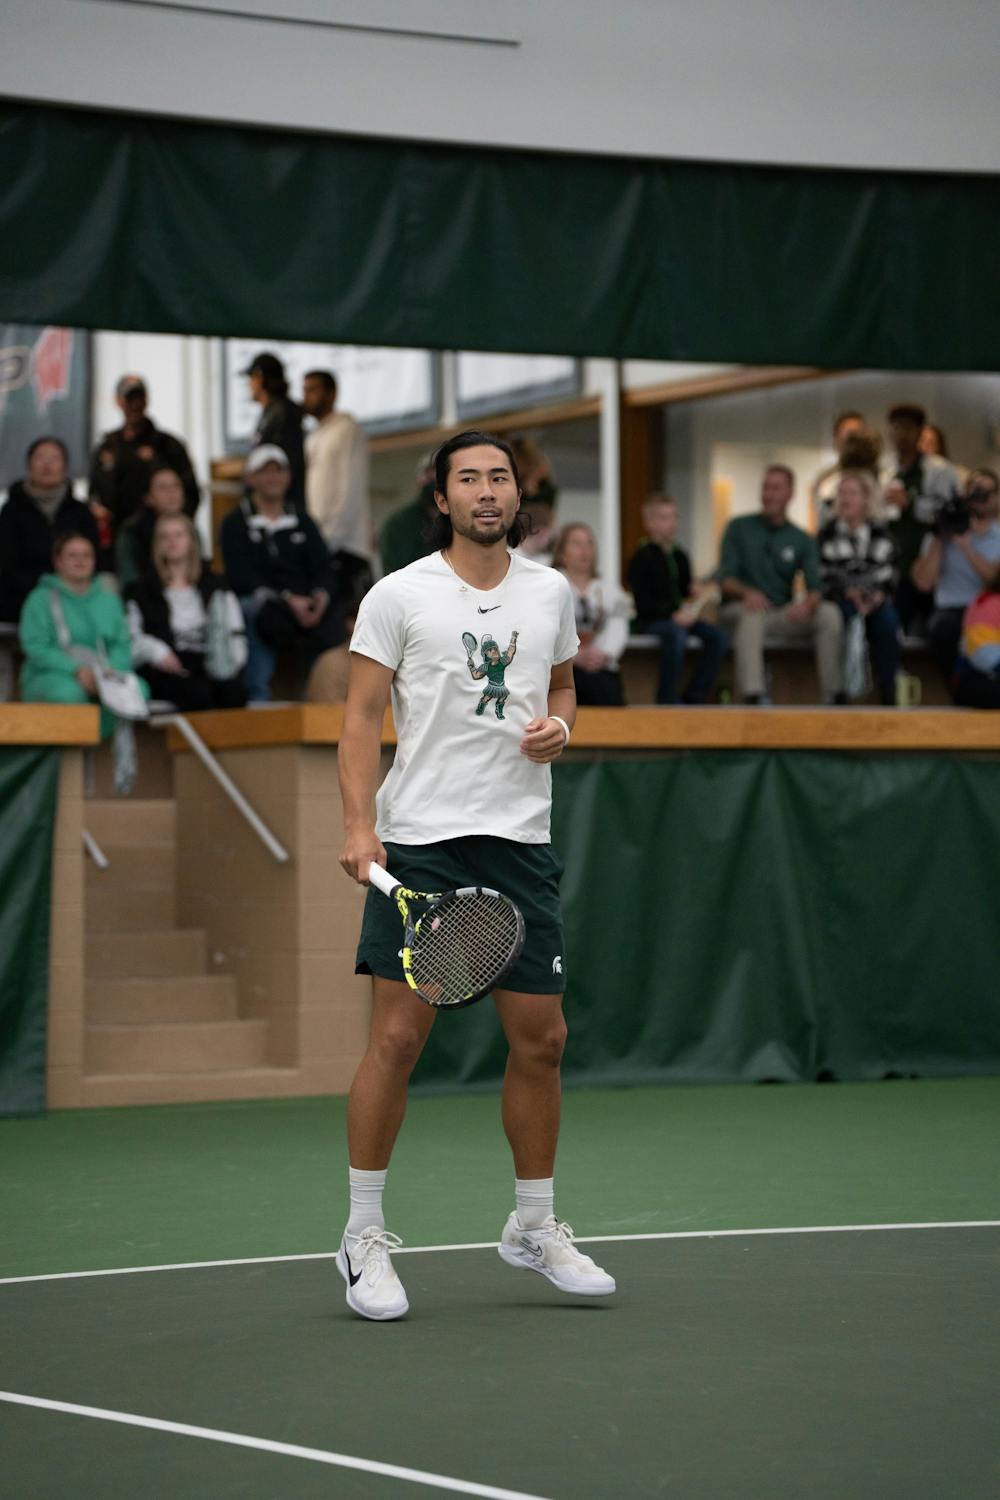 <p>Senior Kazuki Matsuno waits for the ball during his doubles match with sophomore Josh Portnoy against Michigan at the MSU Tennis Center on March 30, 2023. The Spartans lost to the Wolverines 6-1.</p>